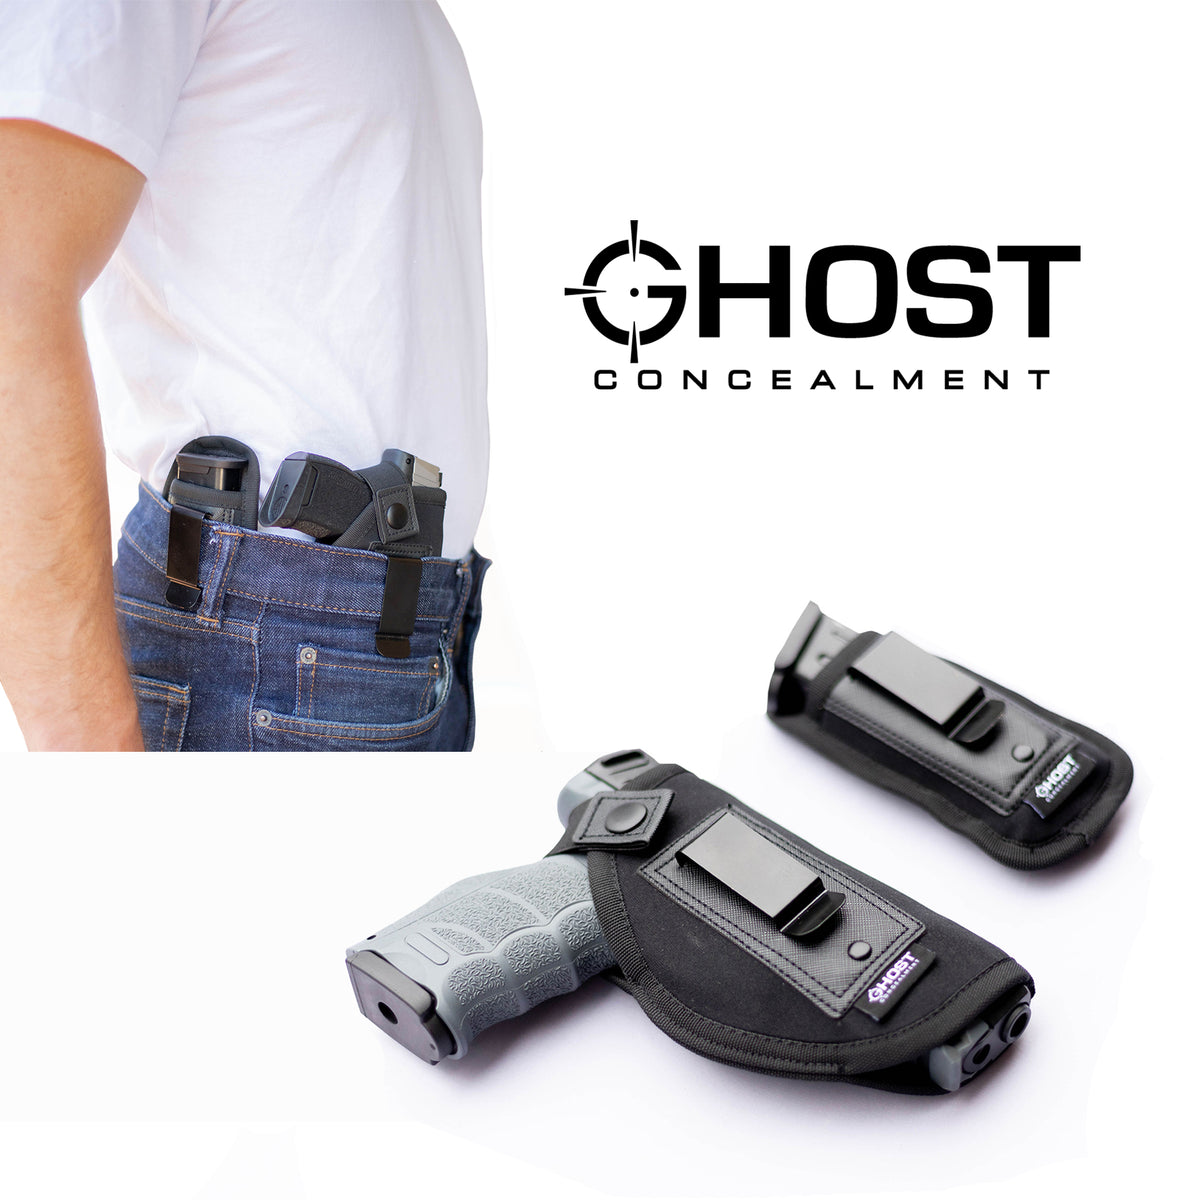 IWB Universal Holster for Concealed Carry